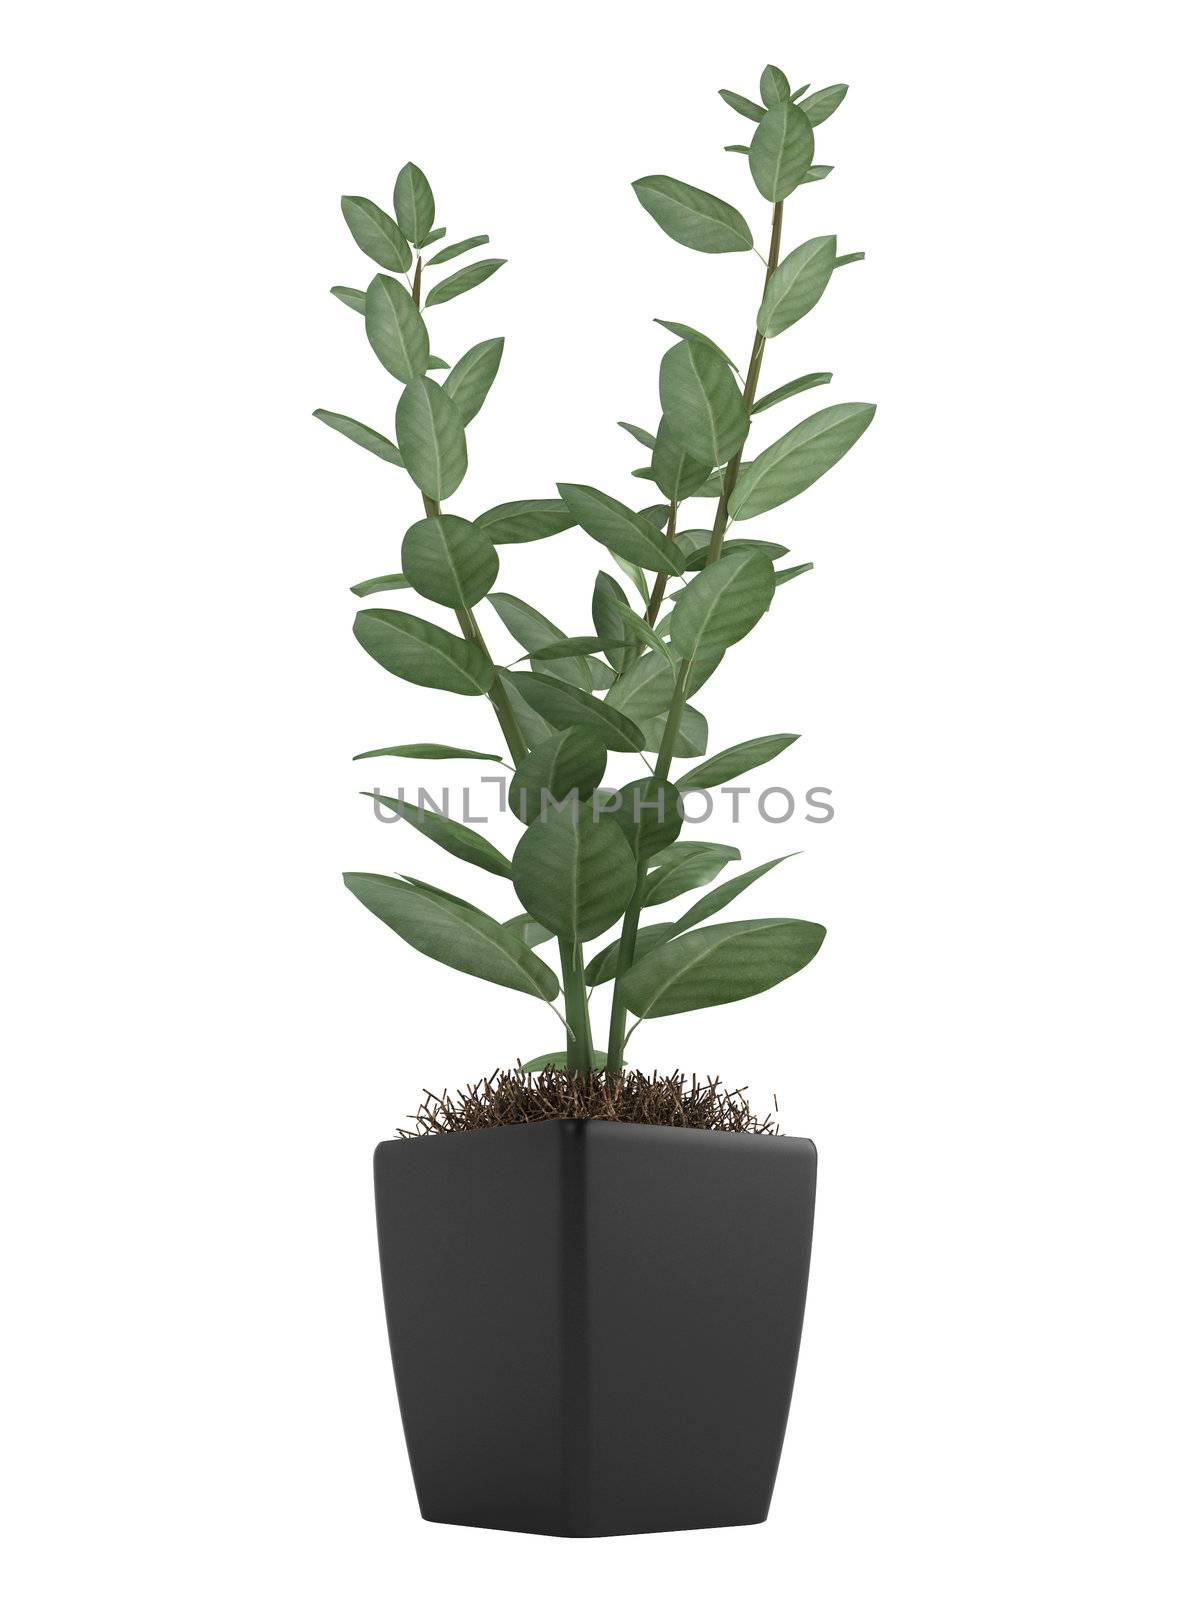 Studio shot of home plant in a pot isolated on white background